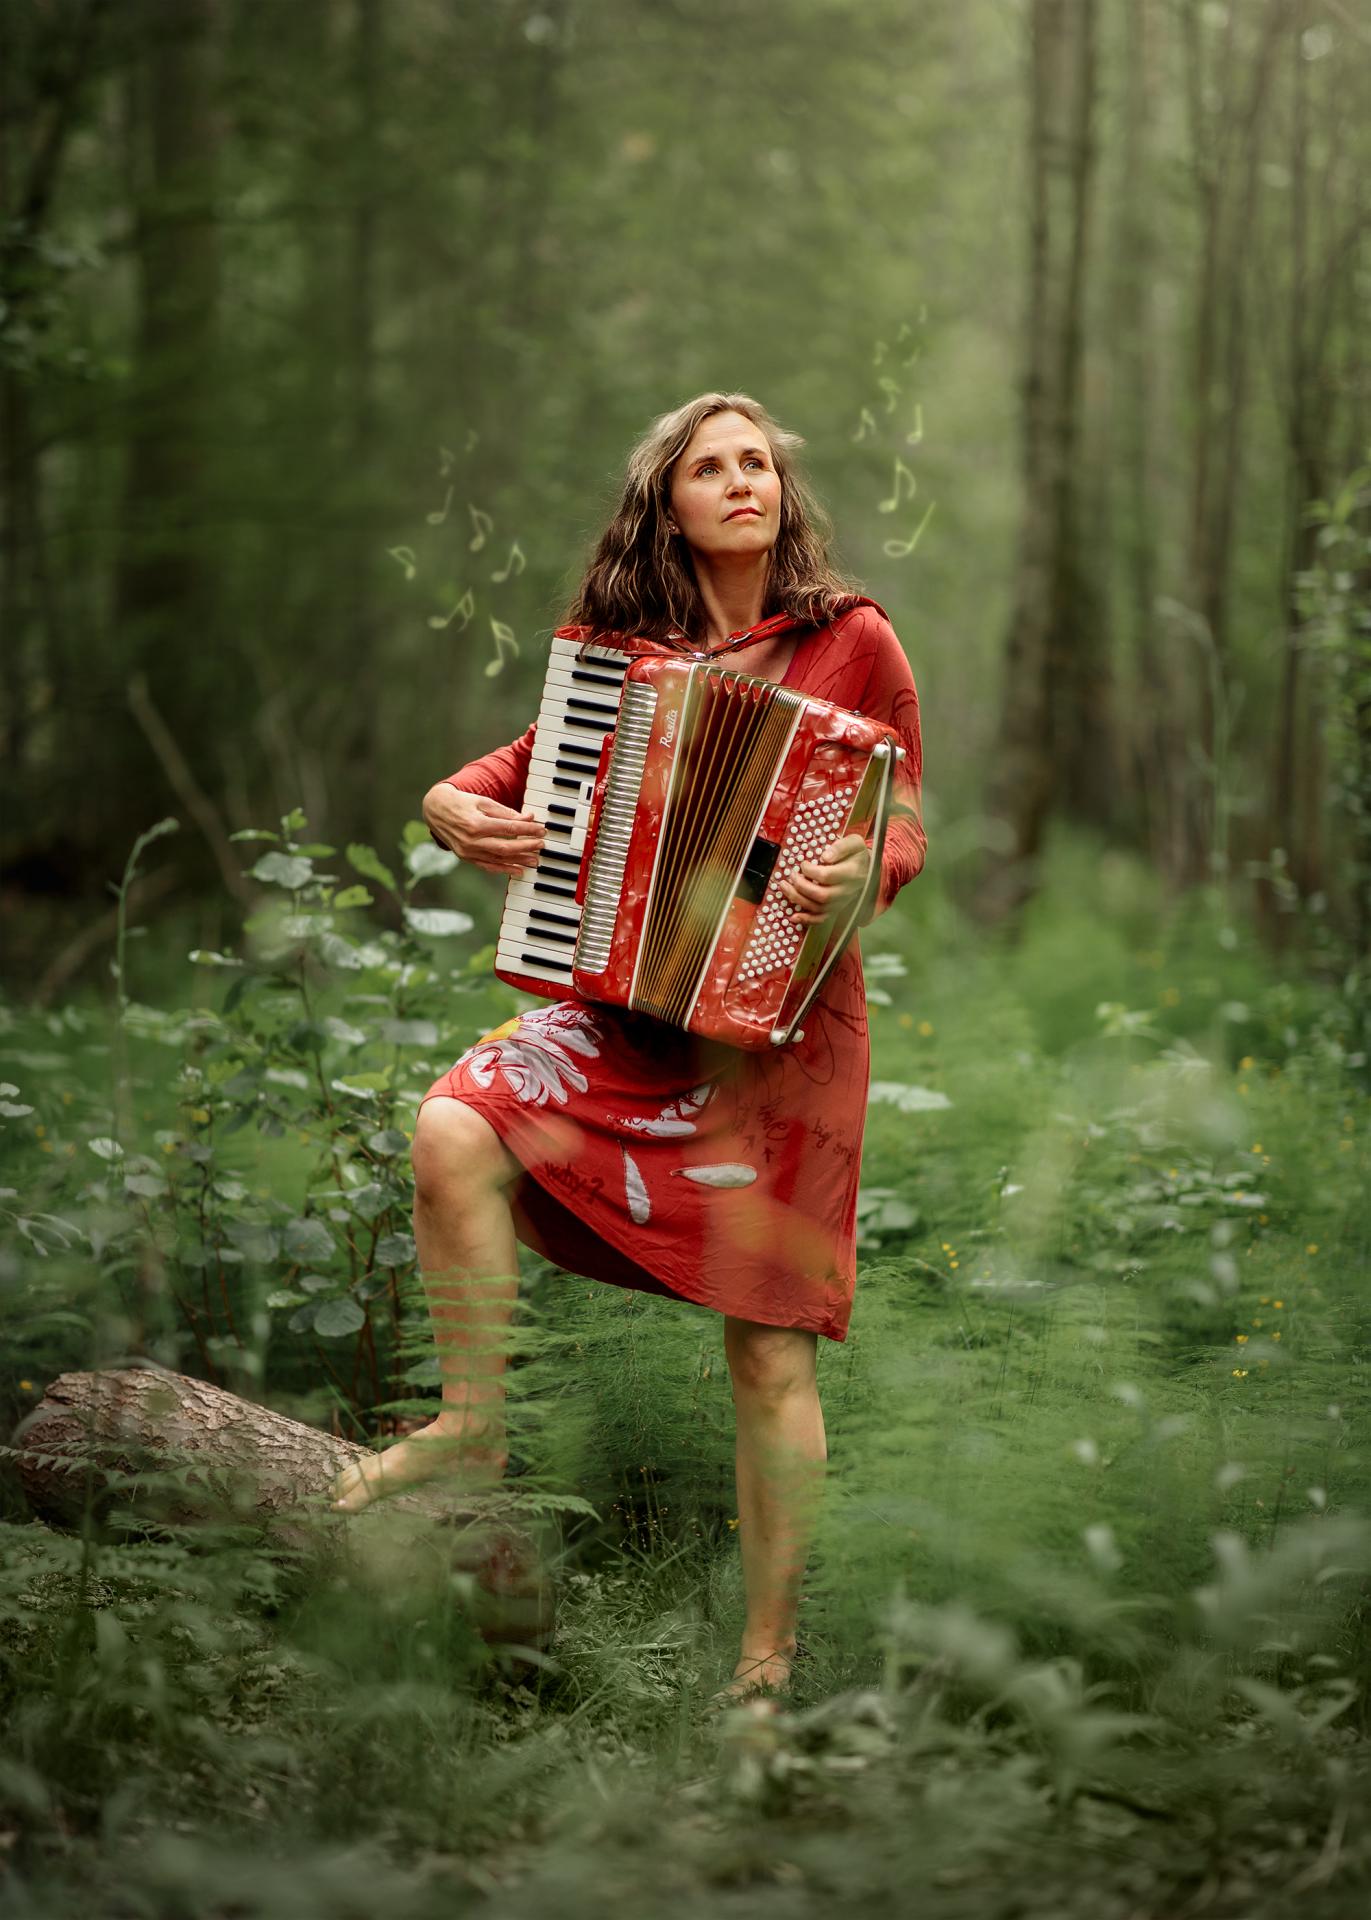 European Photography Awards Winner - Making music come to life